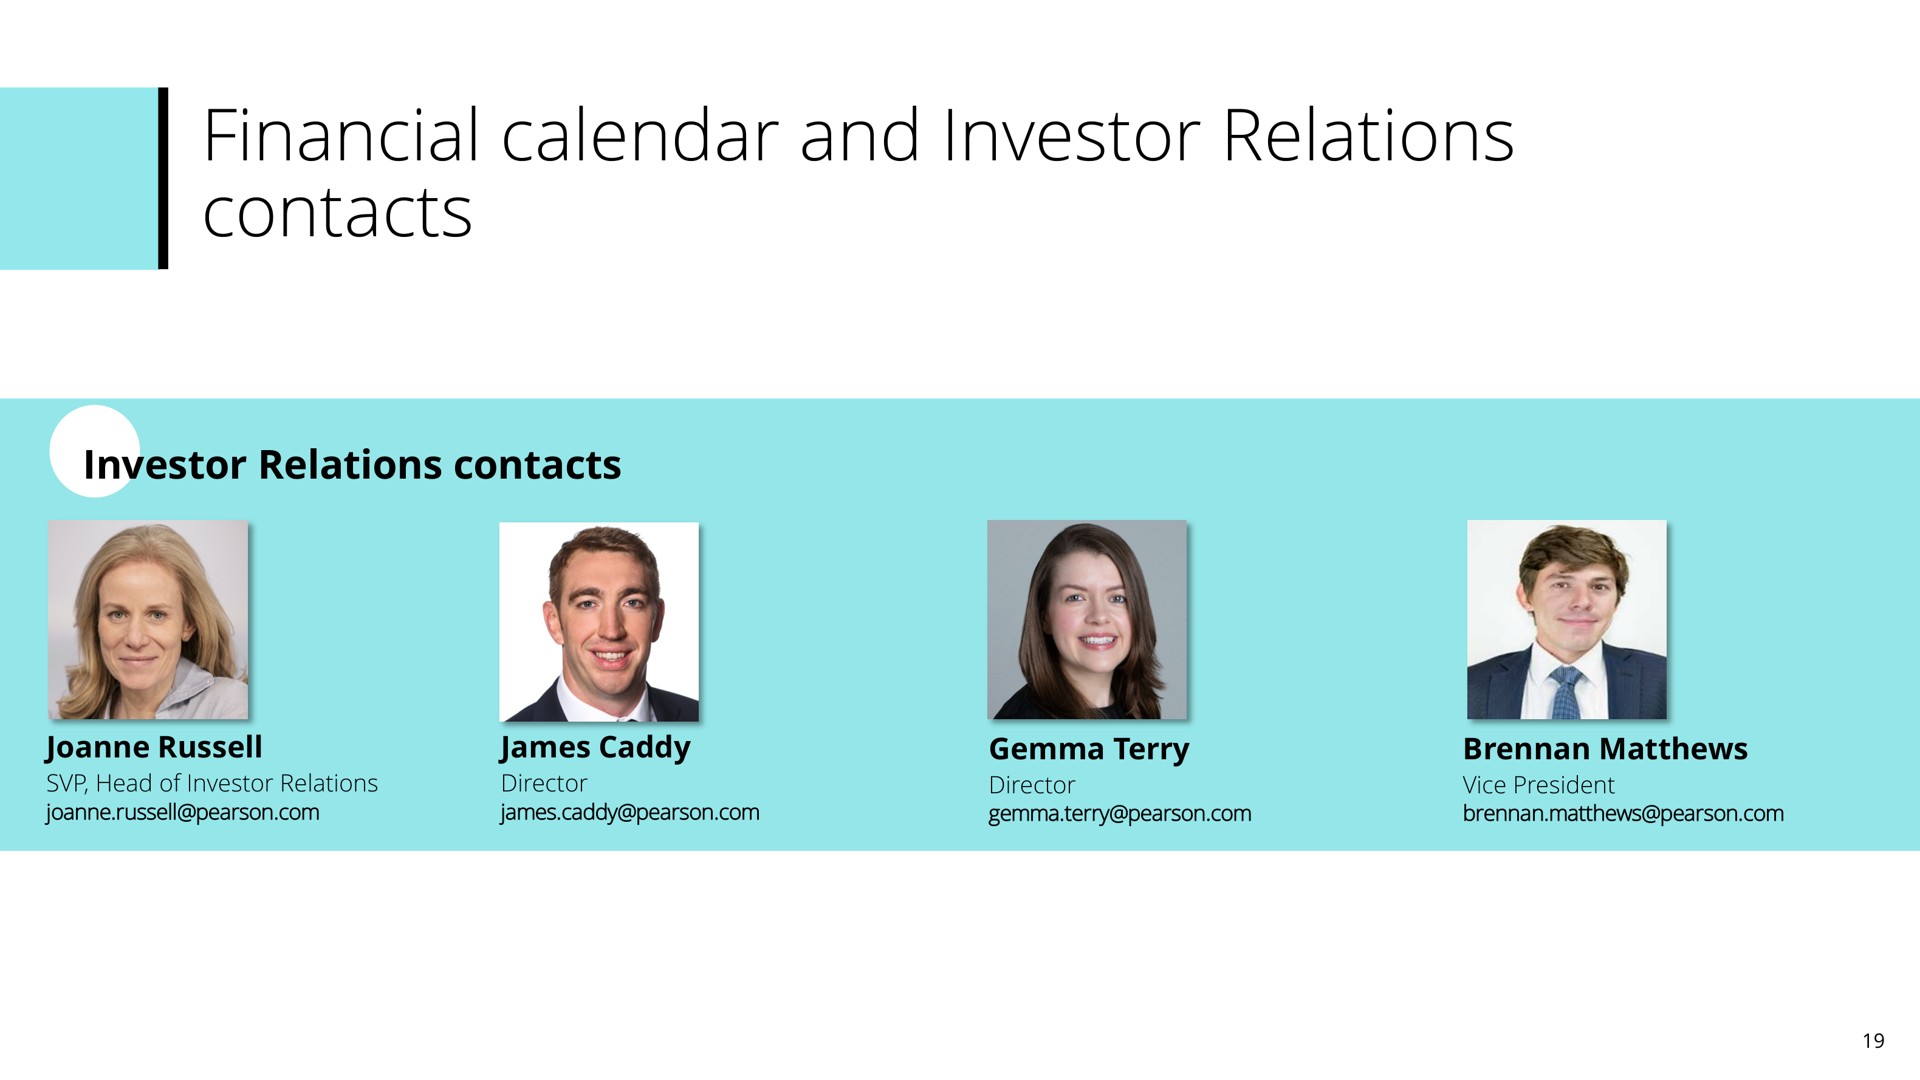 financial calendar and investor relations contacts | Pearson